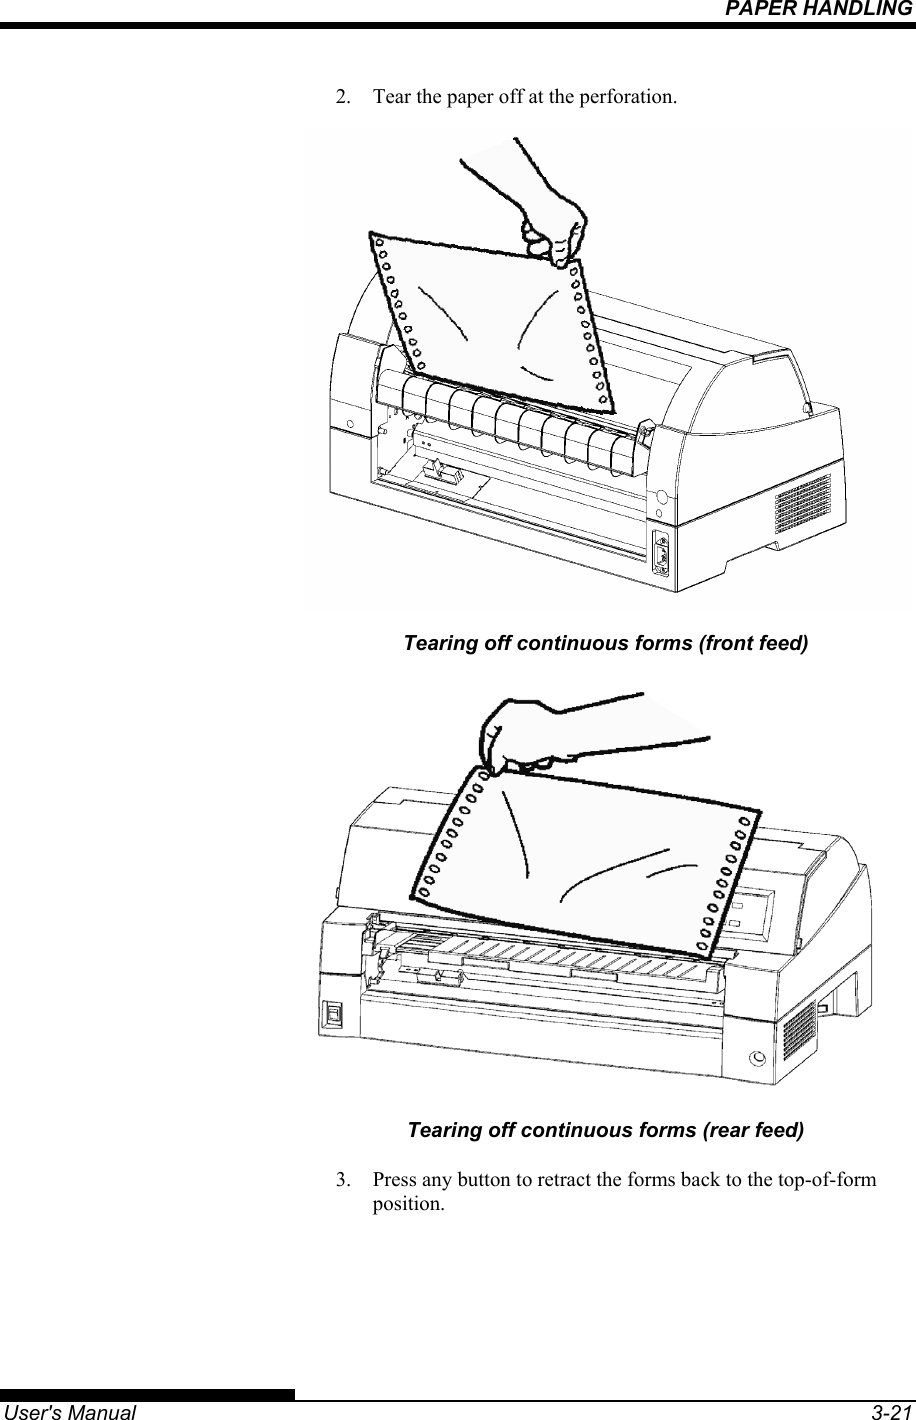 PAPER HANDLING   User&apos;s Manual  3-21 2.  Tear the paper off at the perforation.  Tearing off continuous forms (front feed)  Tearing off continuous forms (rear feed) 3.  Press any button to retract the forms back to the top-of-form position.  